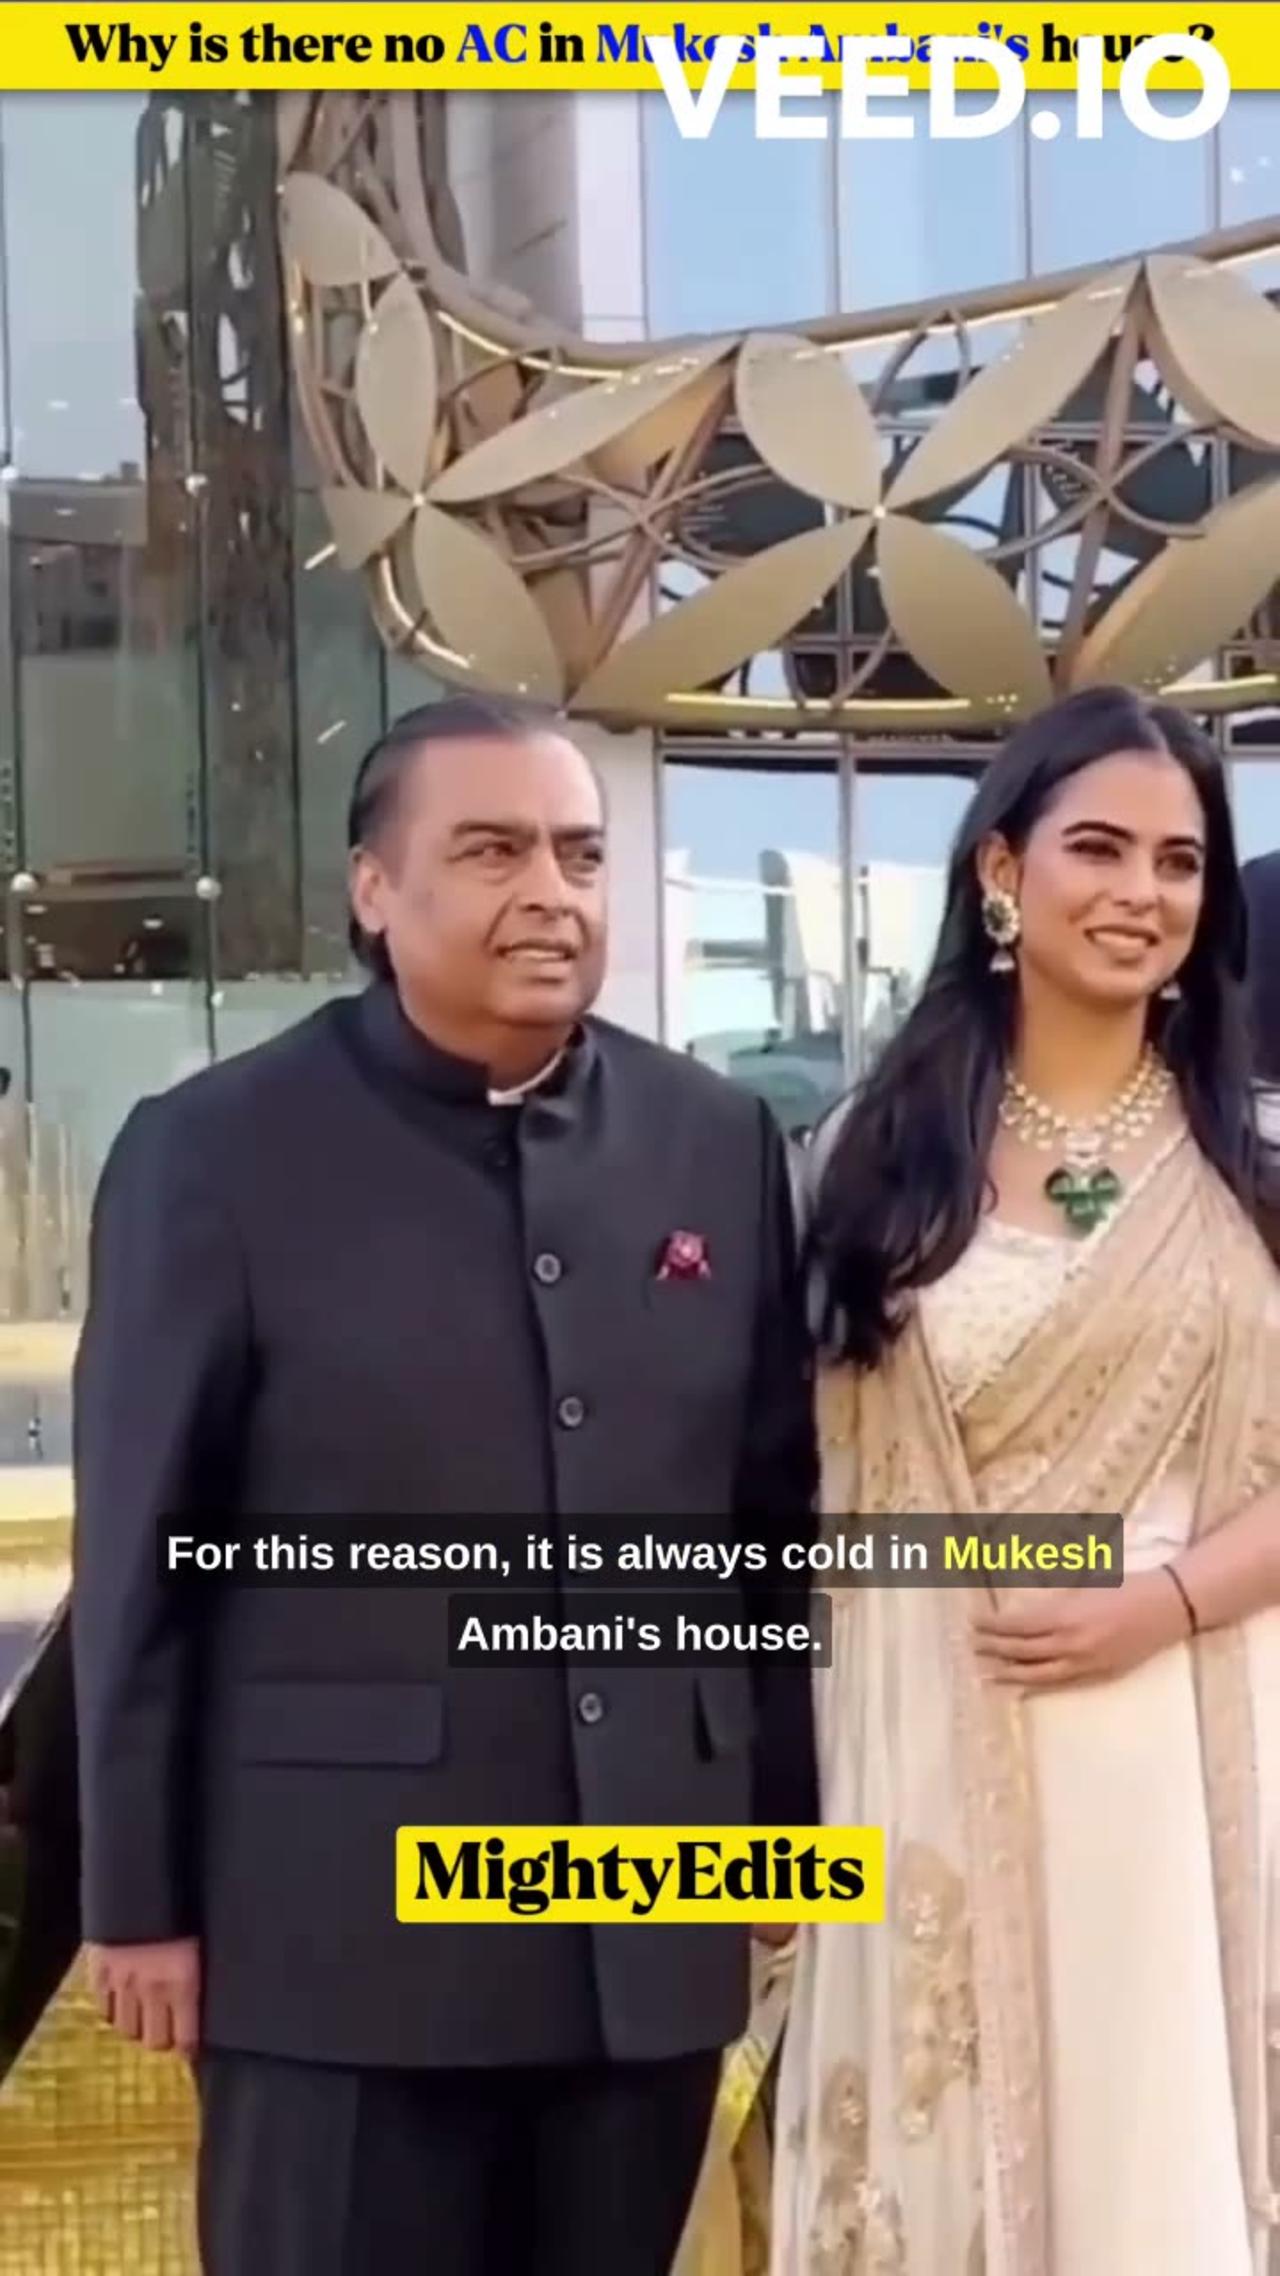 Why is there no need of AC in Mukesh Ambani's house?